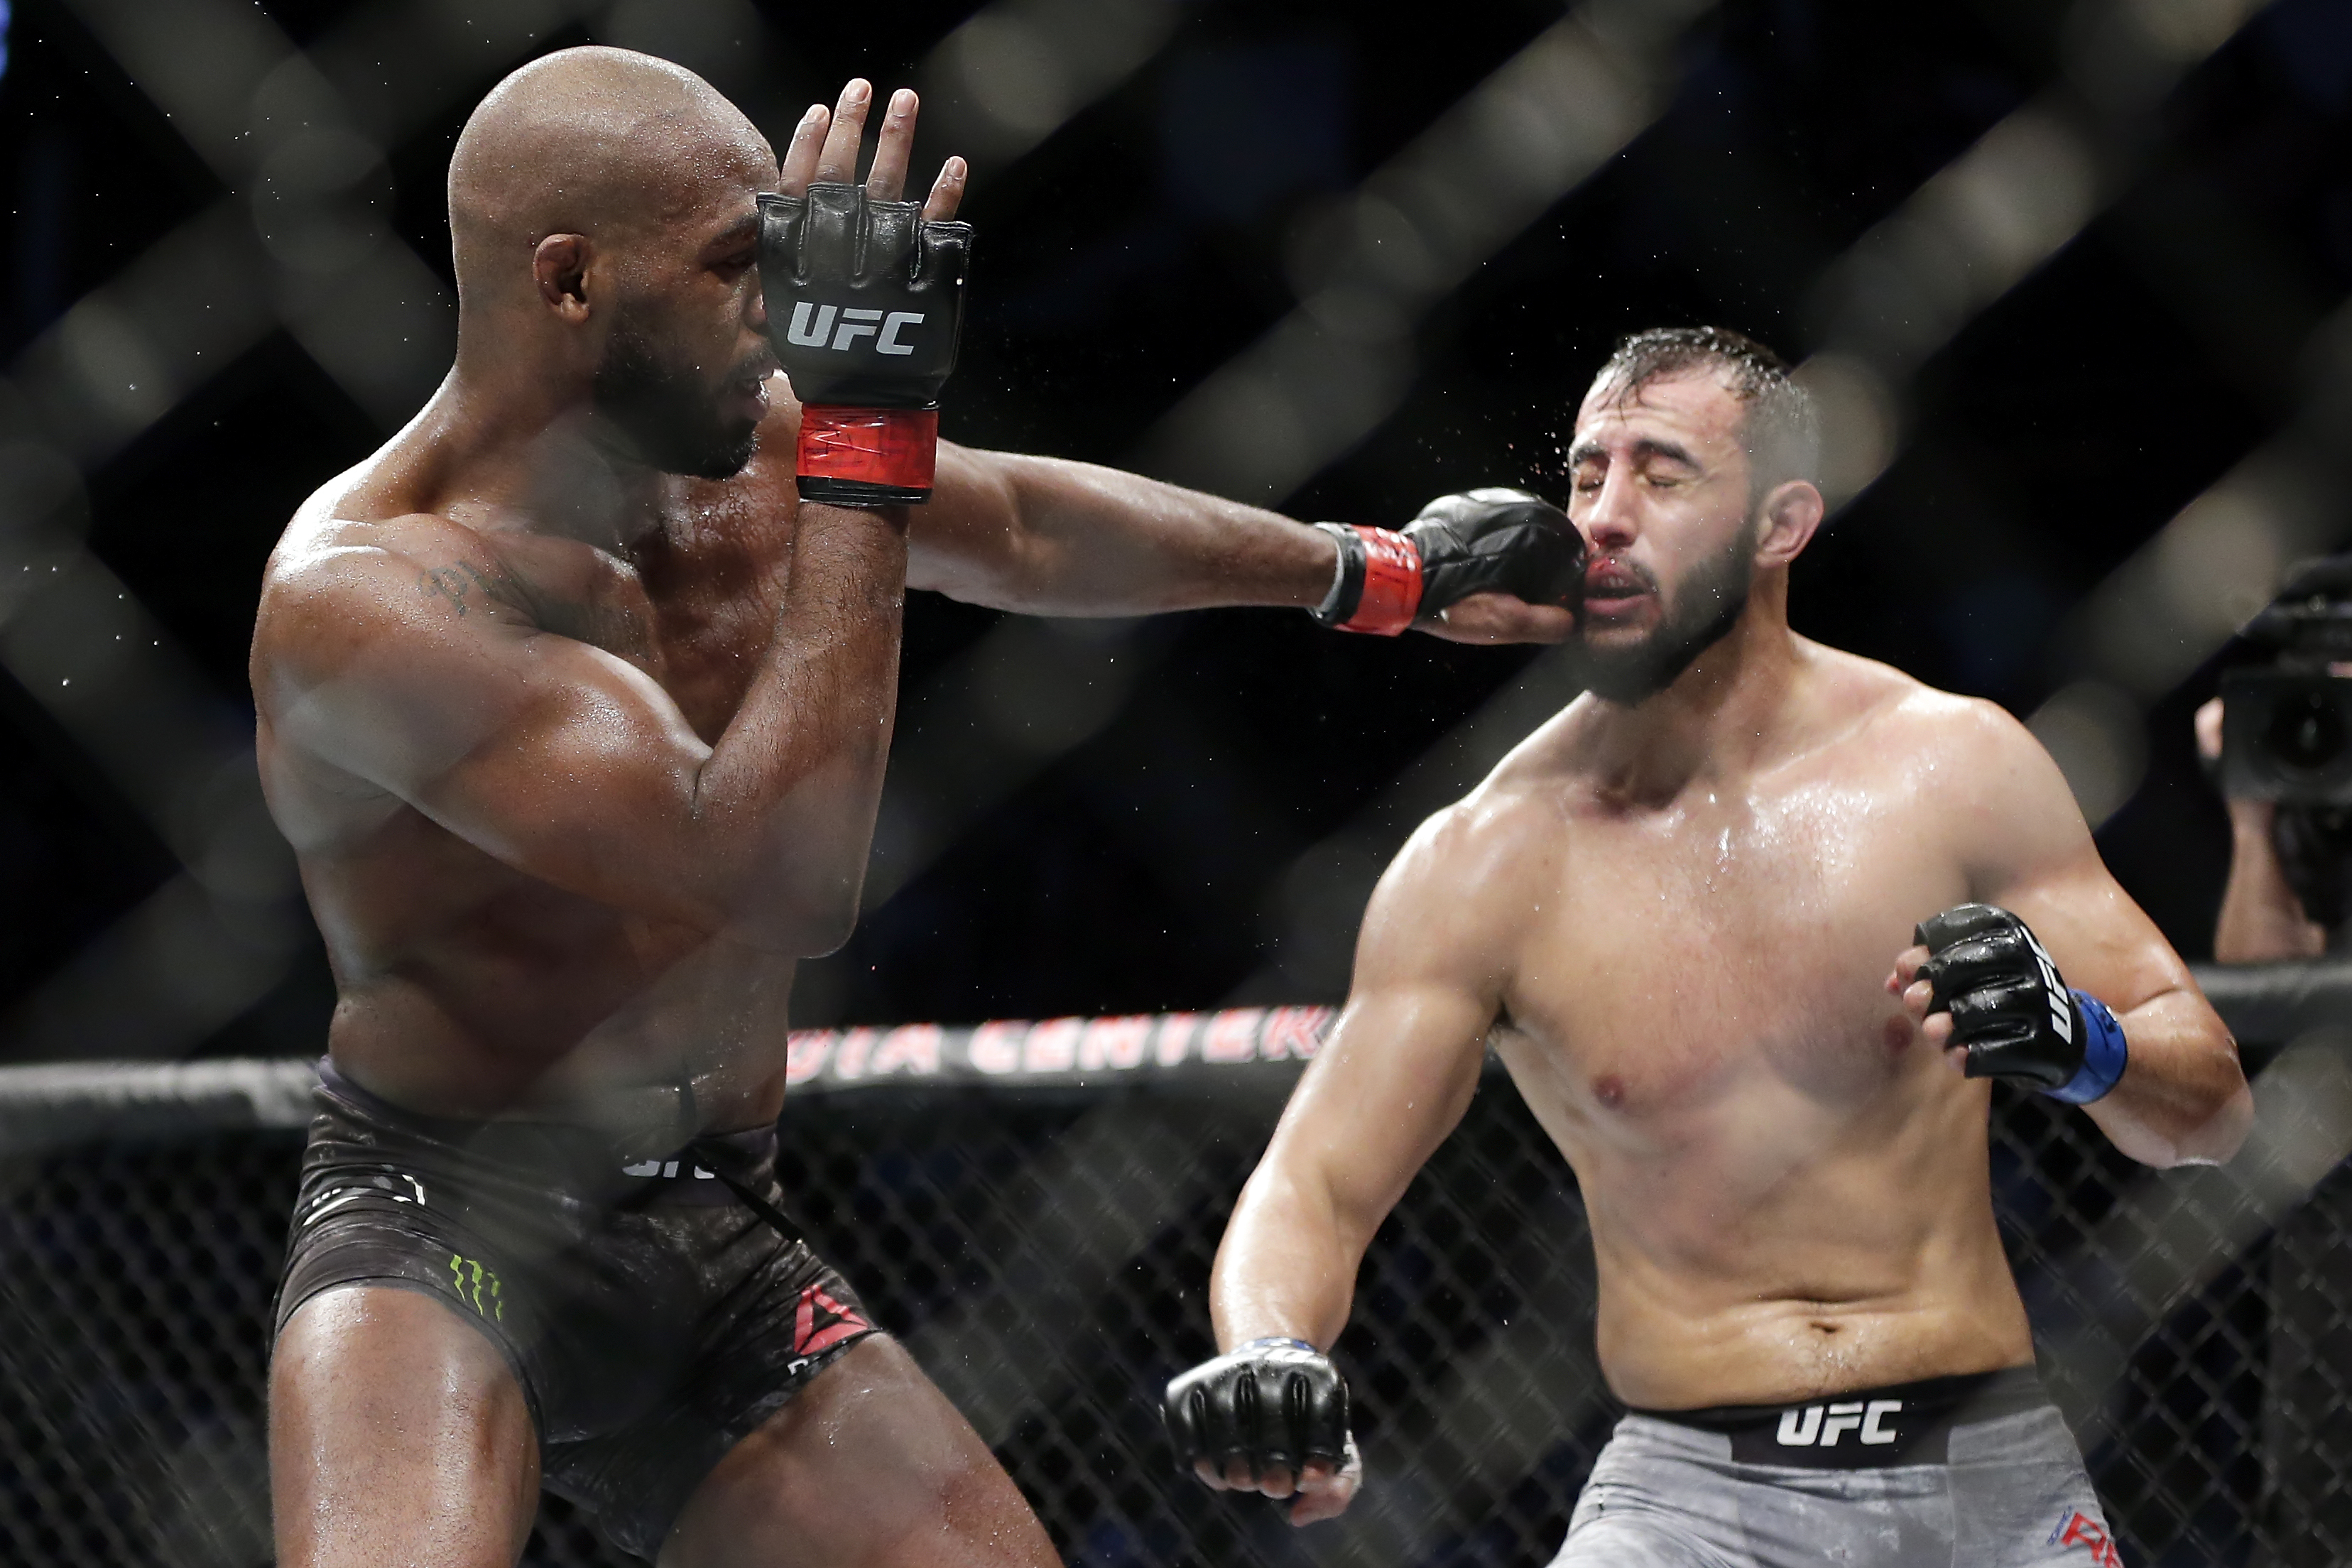 Jon Jones in action against Dominick Reyes during his last fight in February. (Image